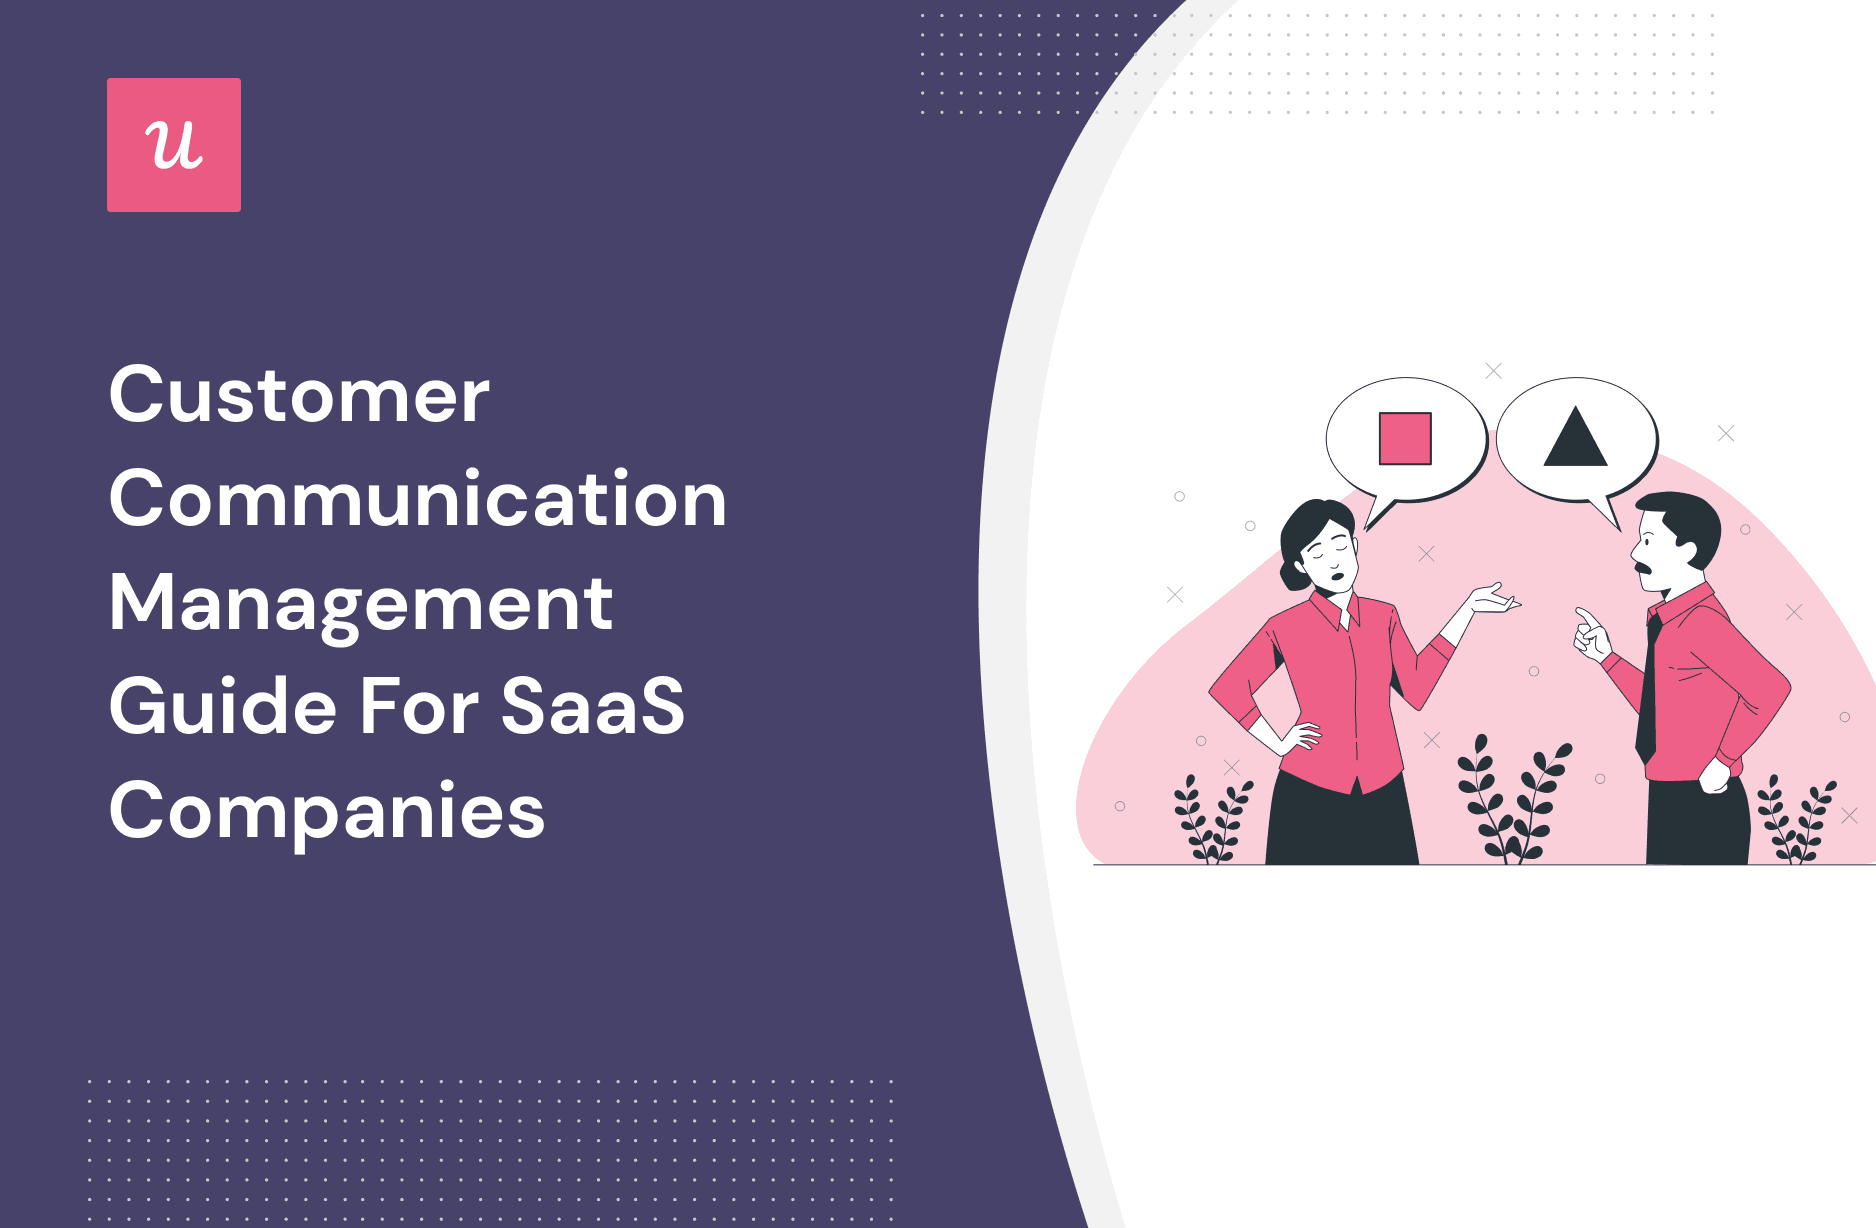 Customer Communication Management Guide For SaaS Companies cover